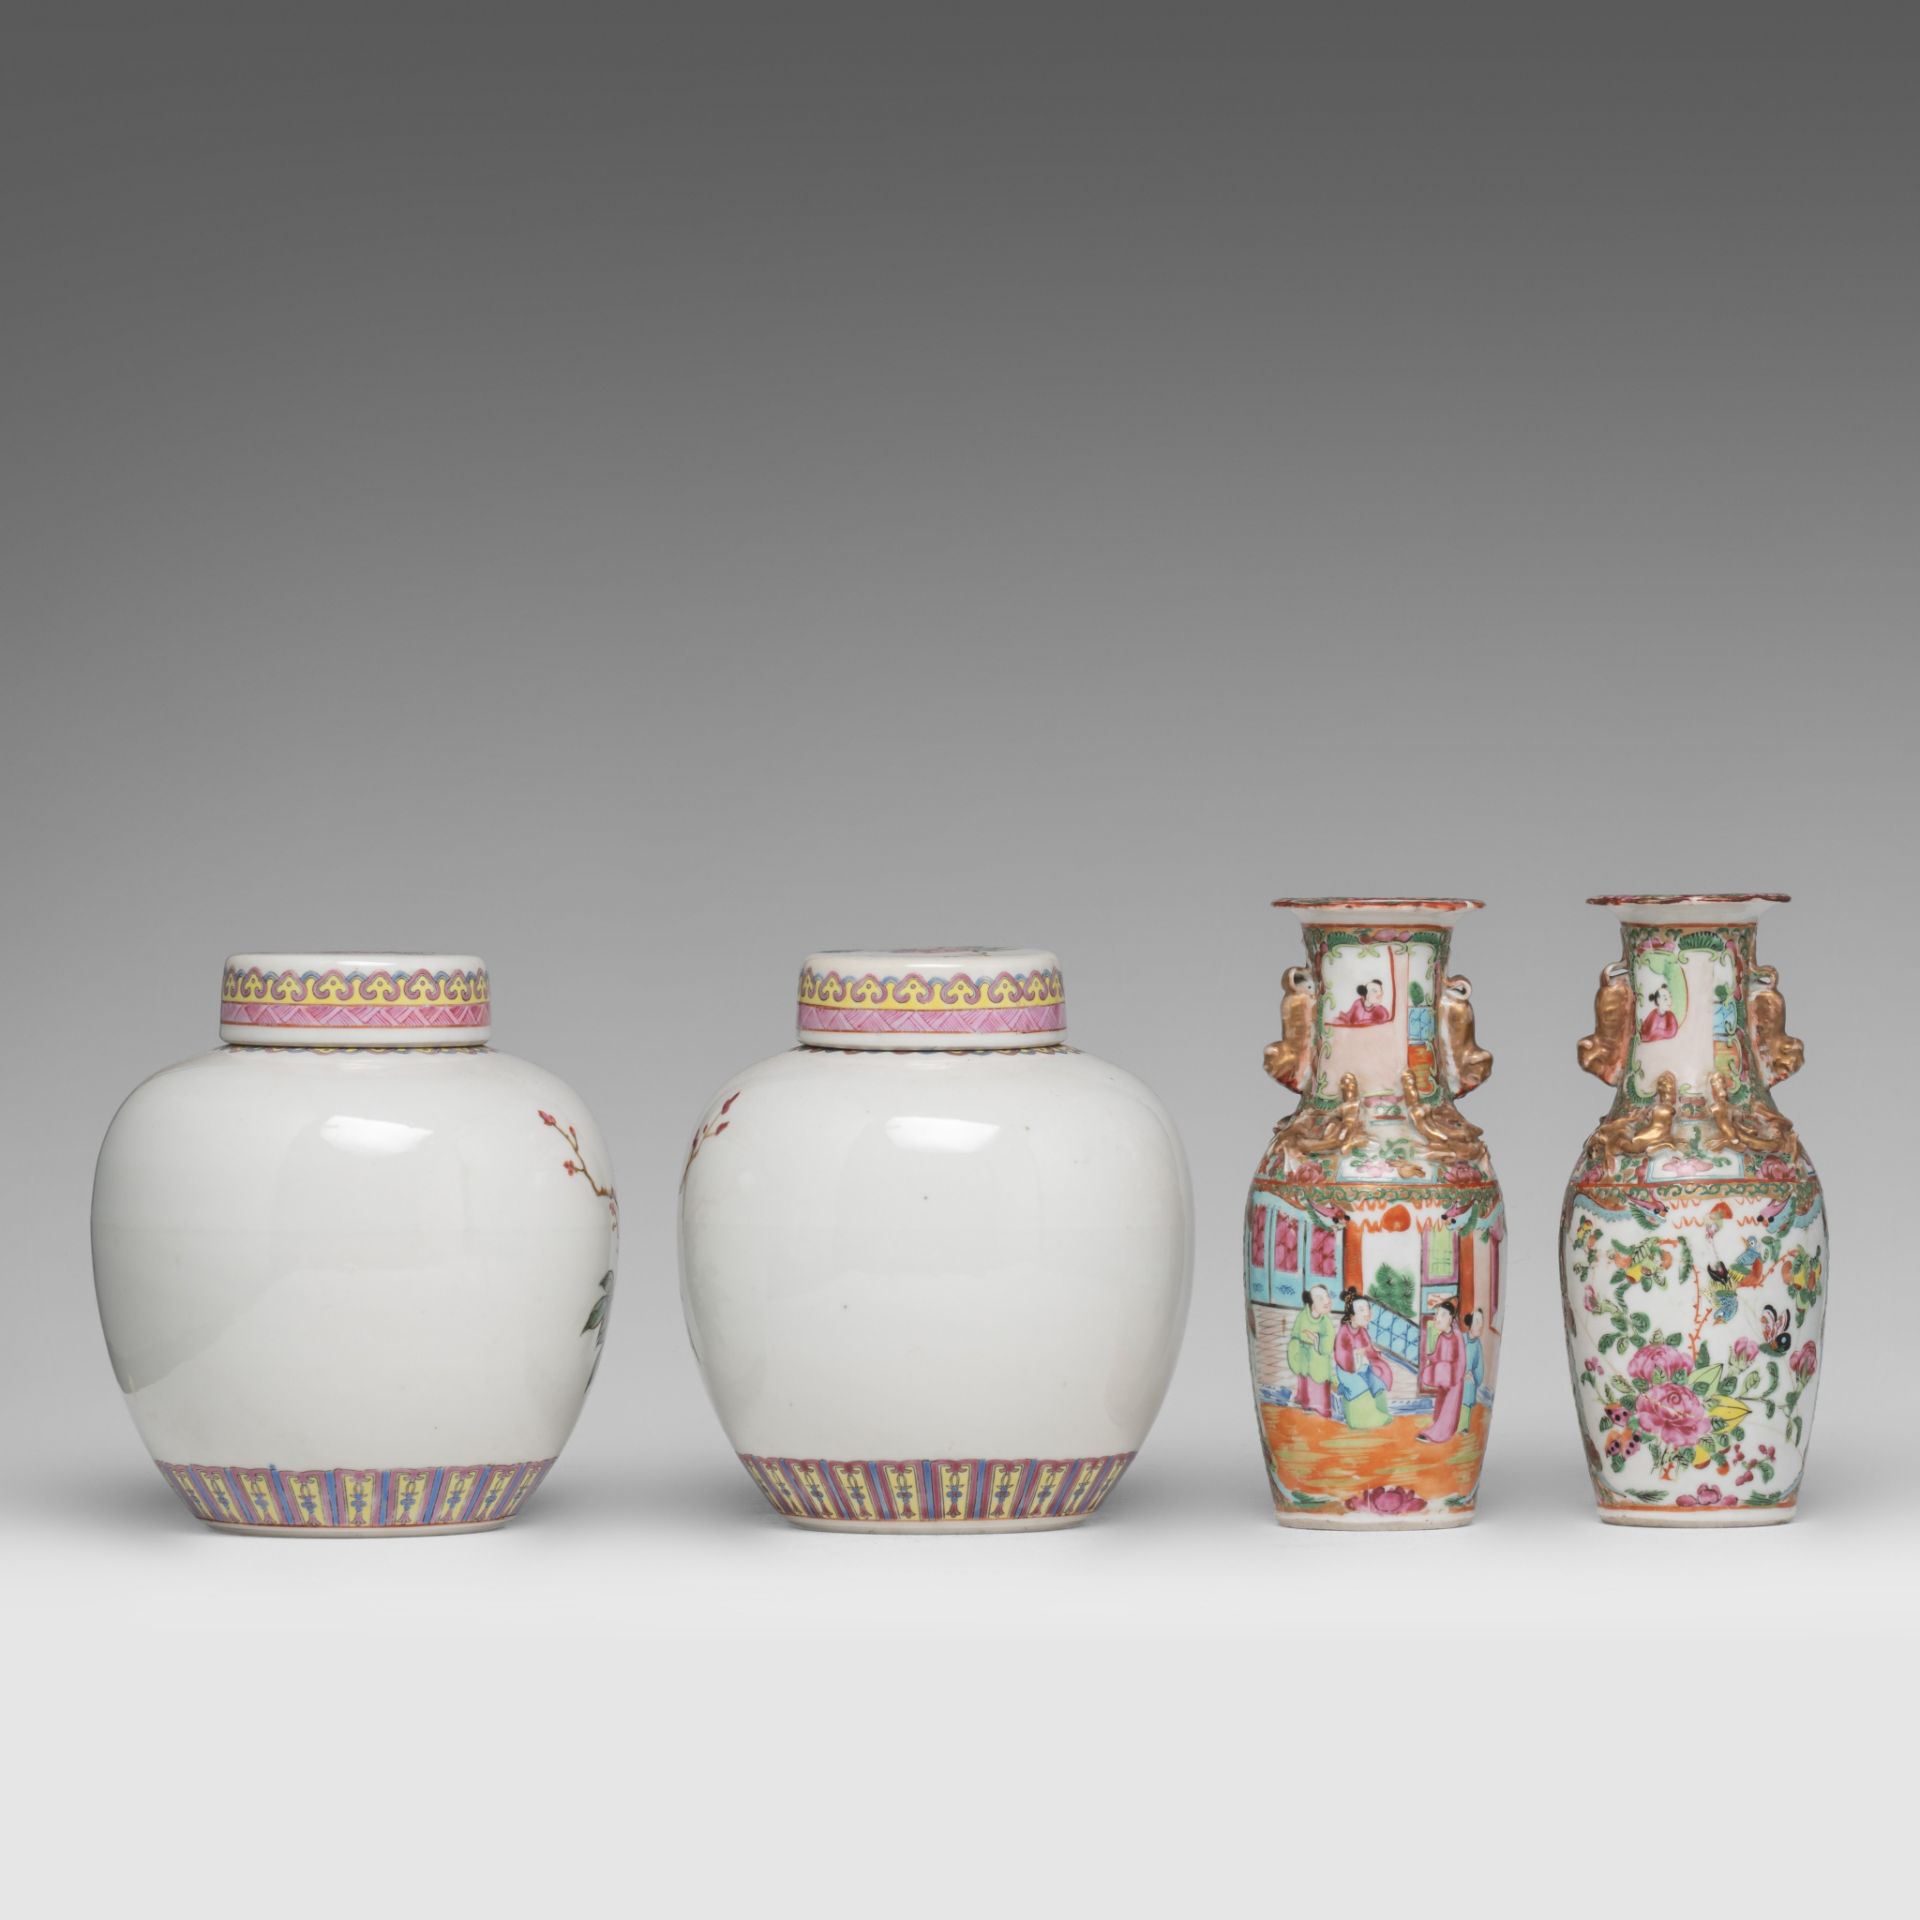 A collection of Chinese famille rose ware, 19thC and 20thC, H 18,5 - 20,5 - dia 15 cm - Bild 5 aus 12